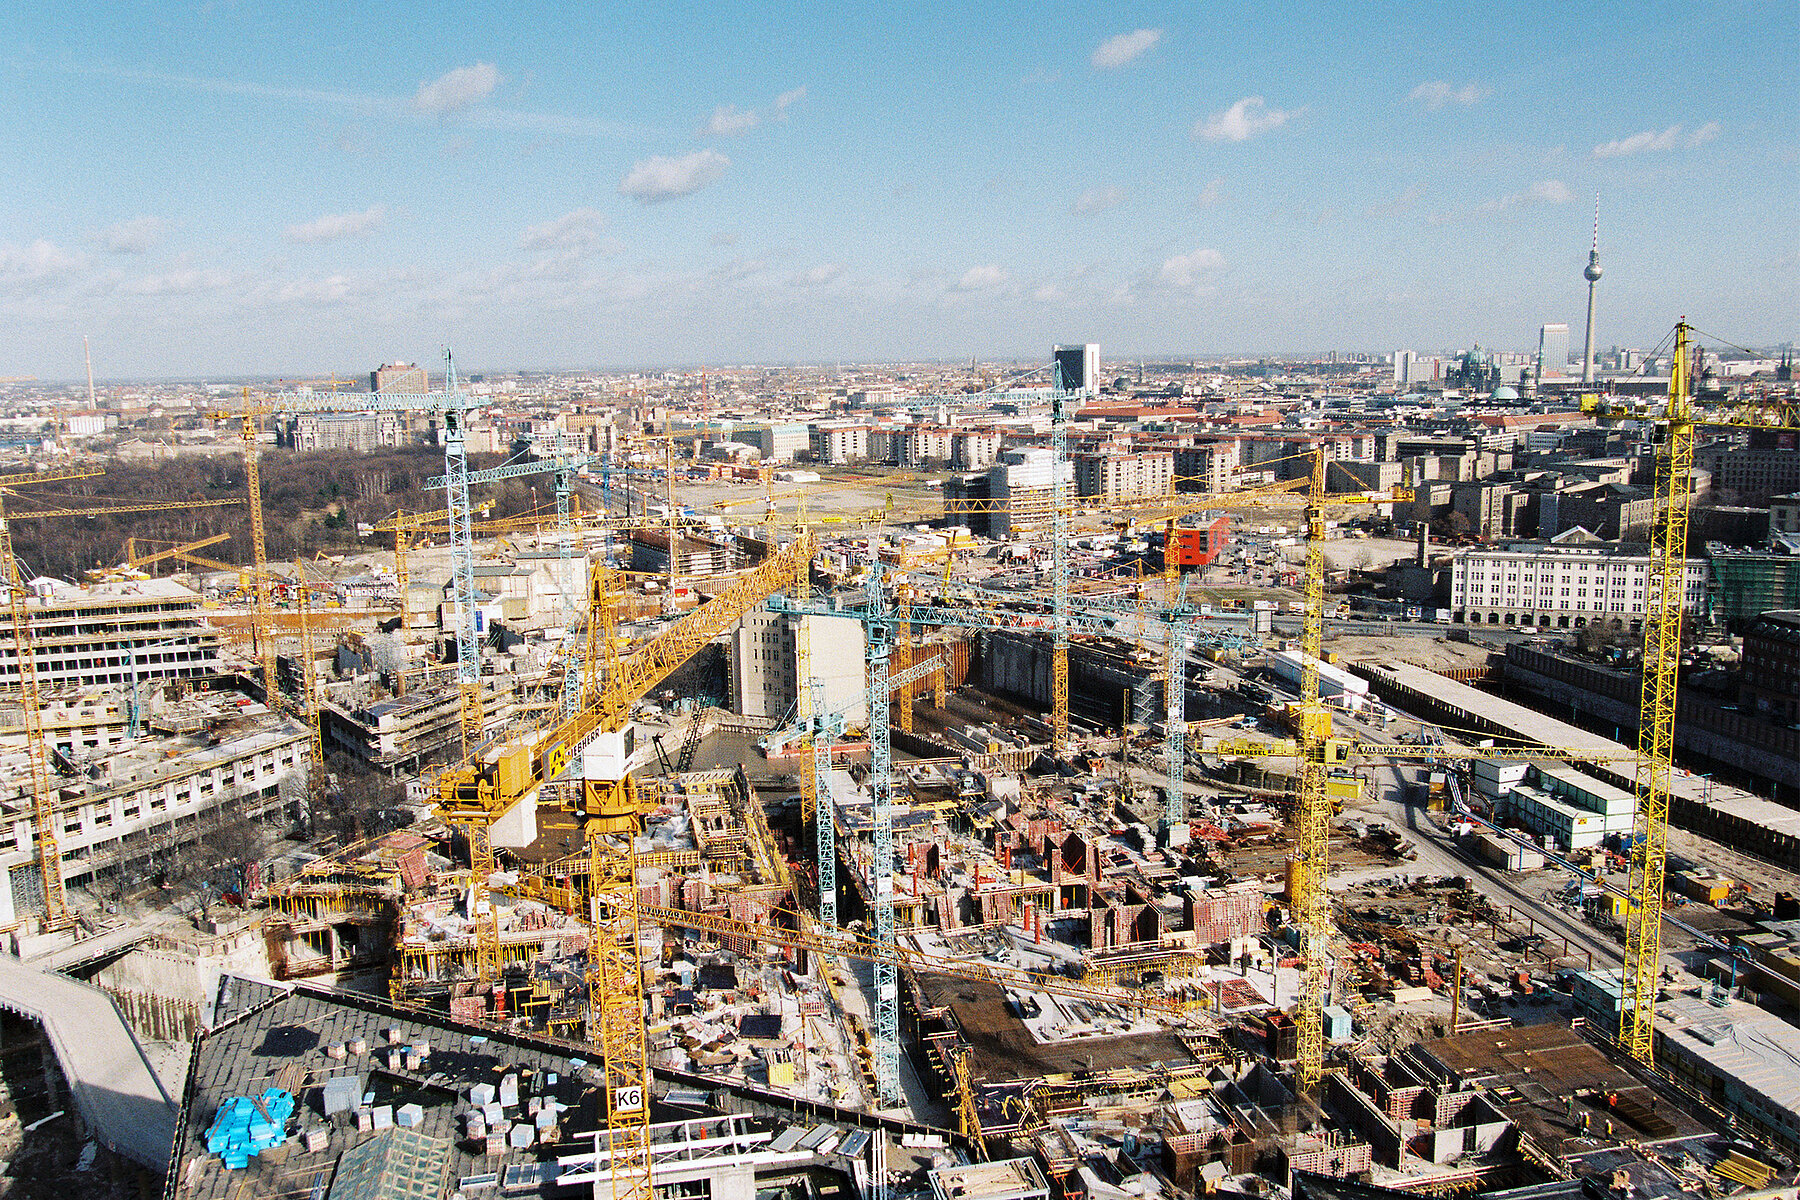 The huge construction site on Potsdamer Platz with many cranes from above.